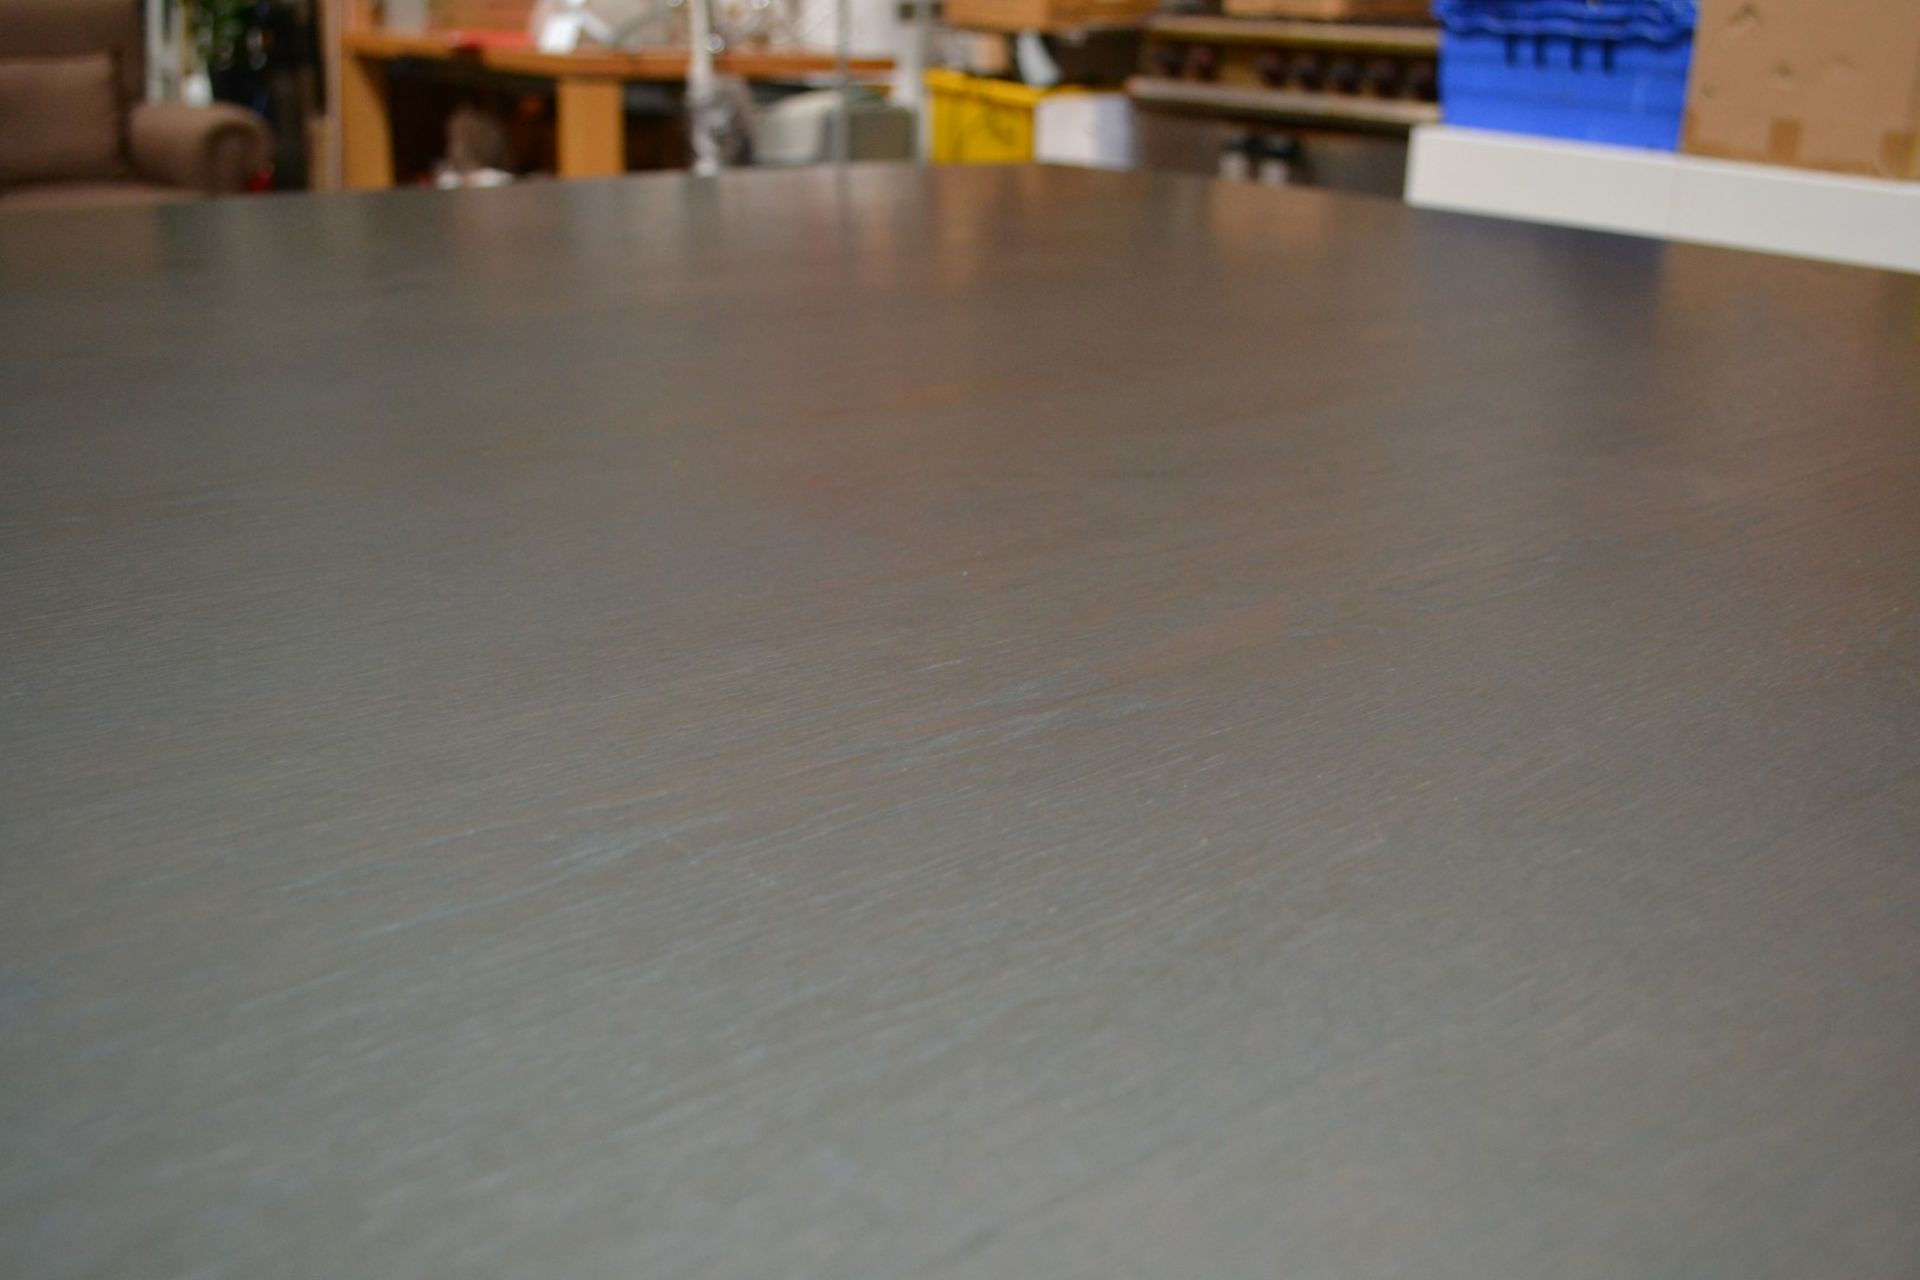 1 x Large Square Wooden Dining Table in a Grey Oak Coloured Finish - CL314 - Location: Altrincham - Image 6 of 10